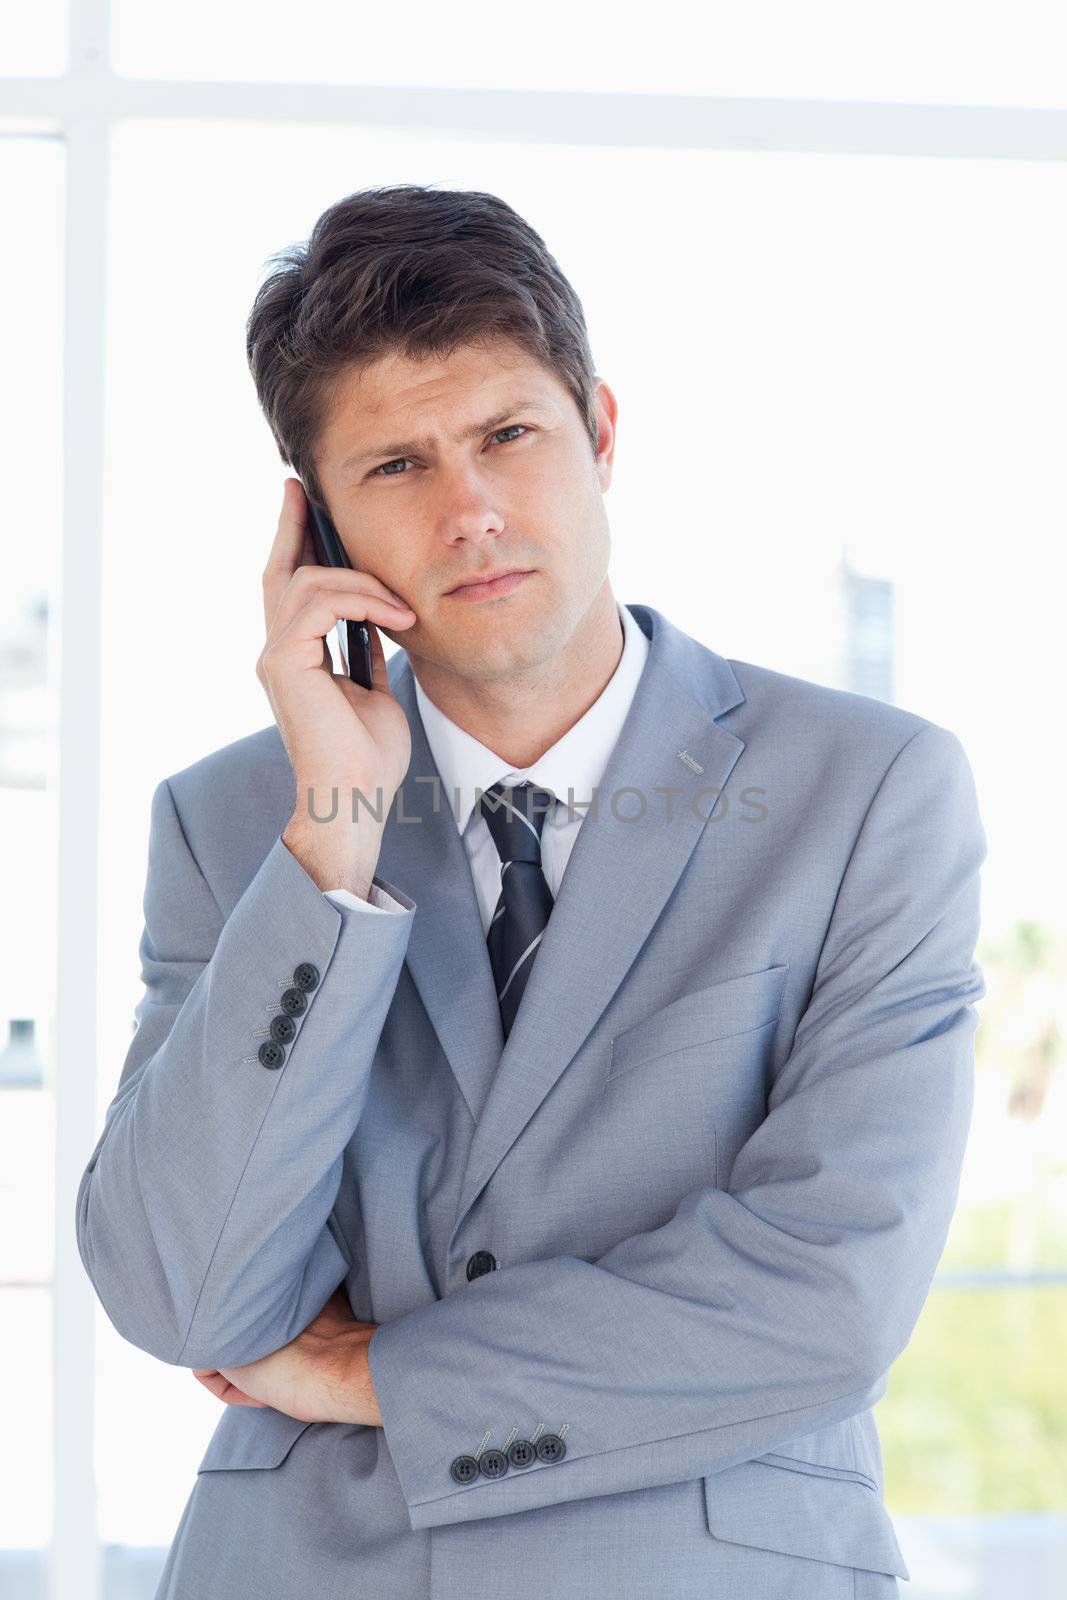 Serious businessman making a call while looking at the camera by Wavebreakmedia